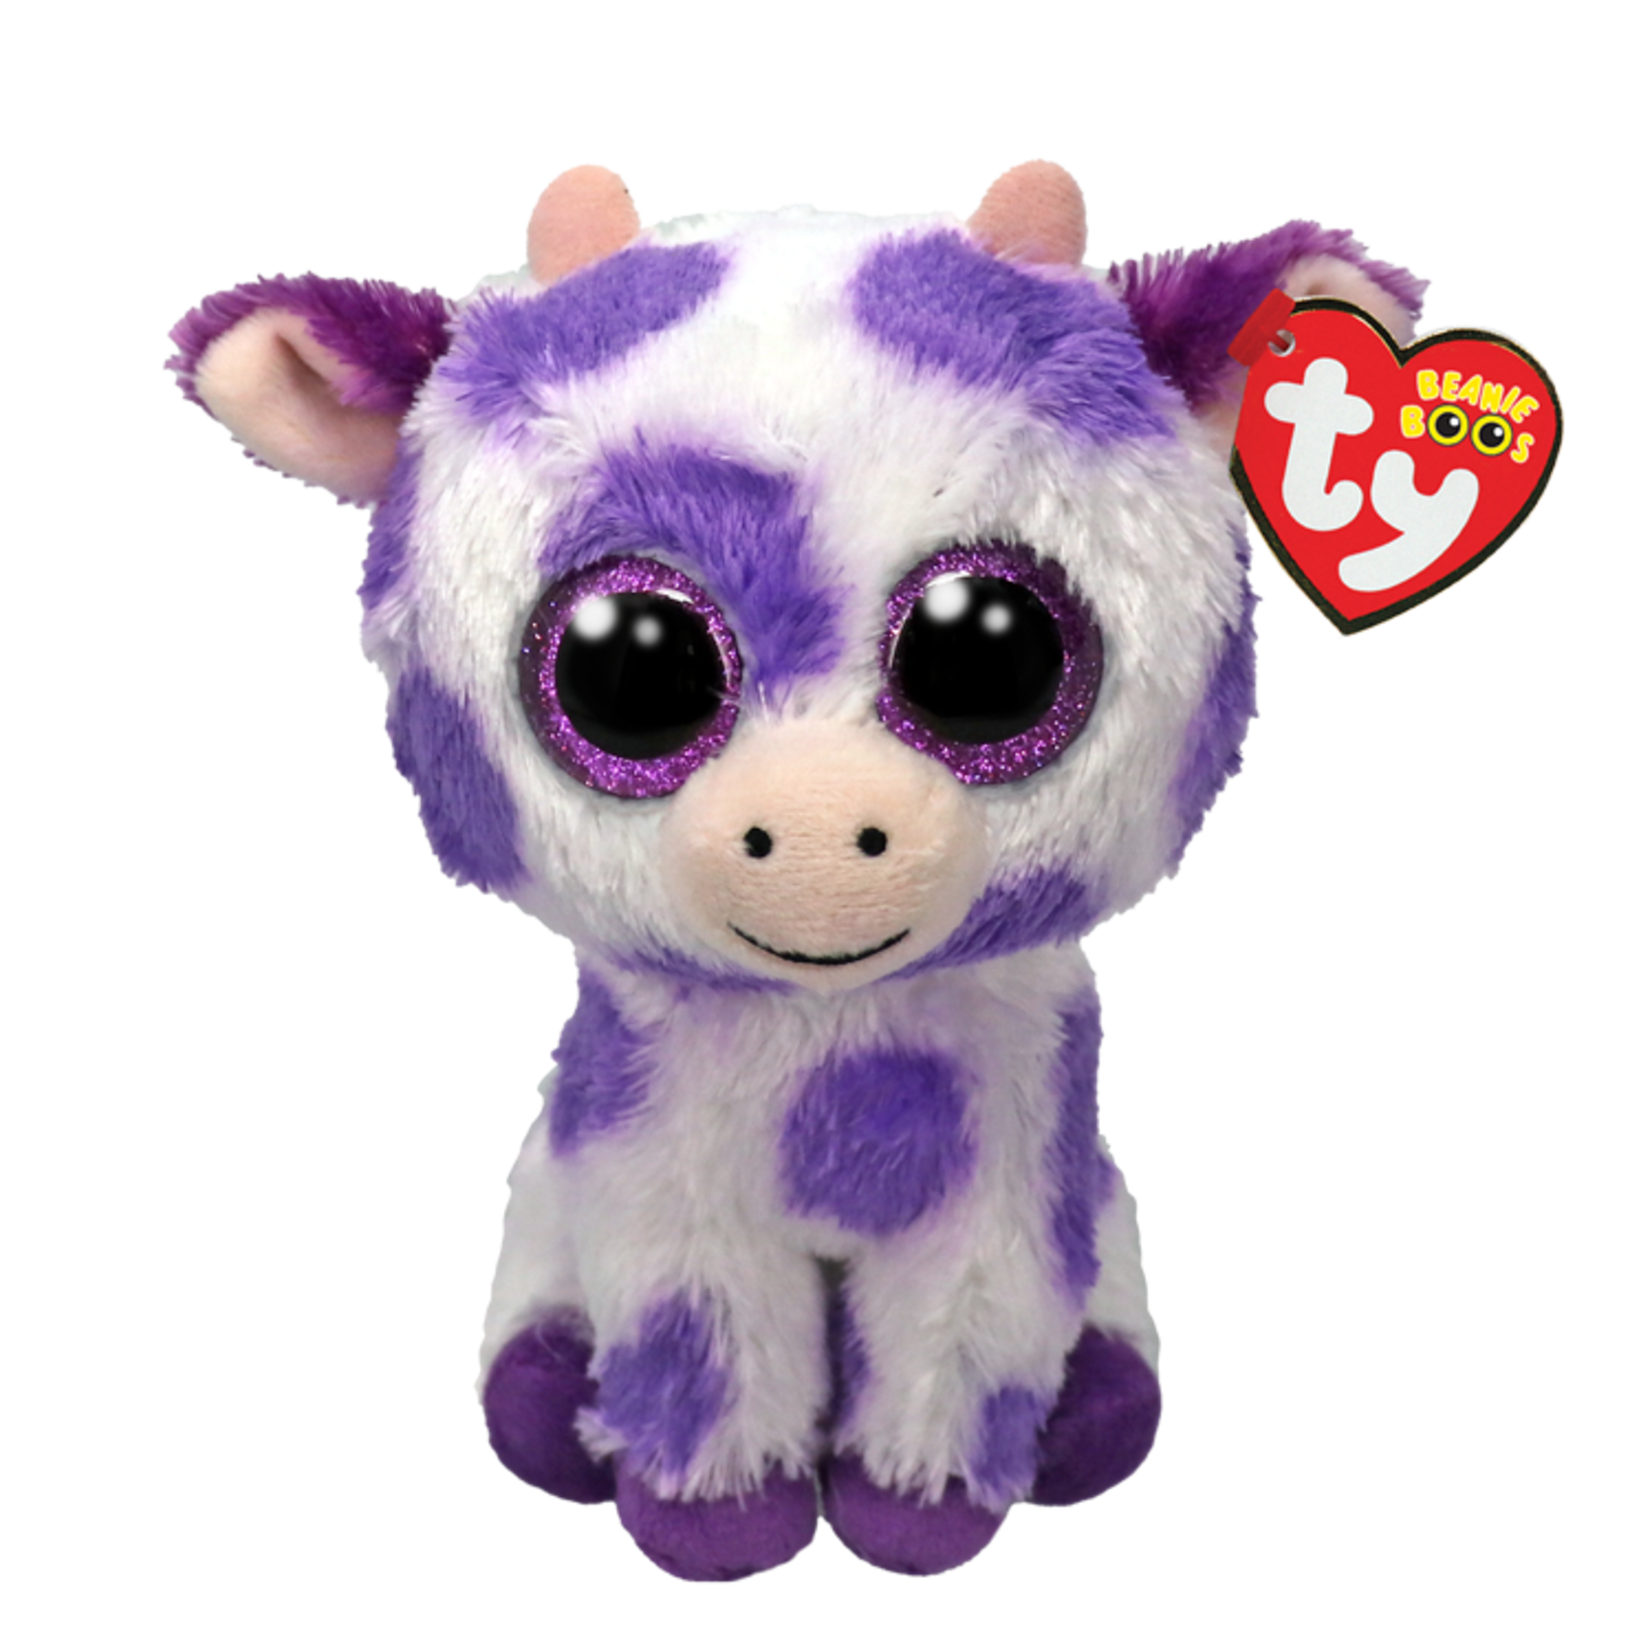 Beanie Boo - Ethel the Purple Spotted Cow